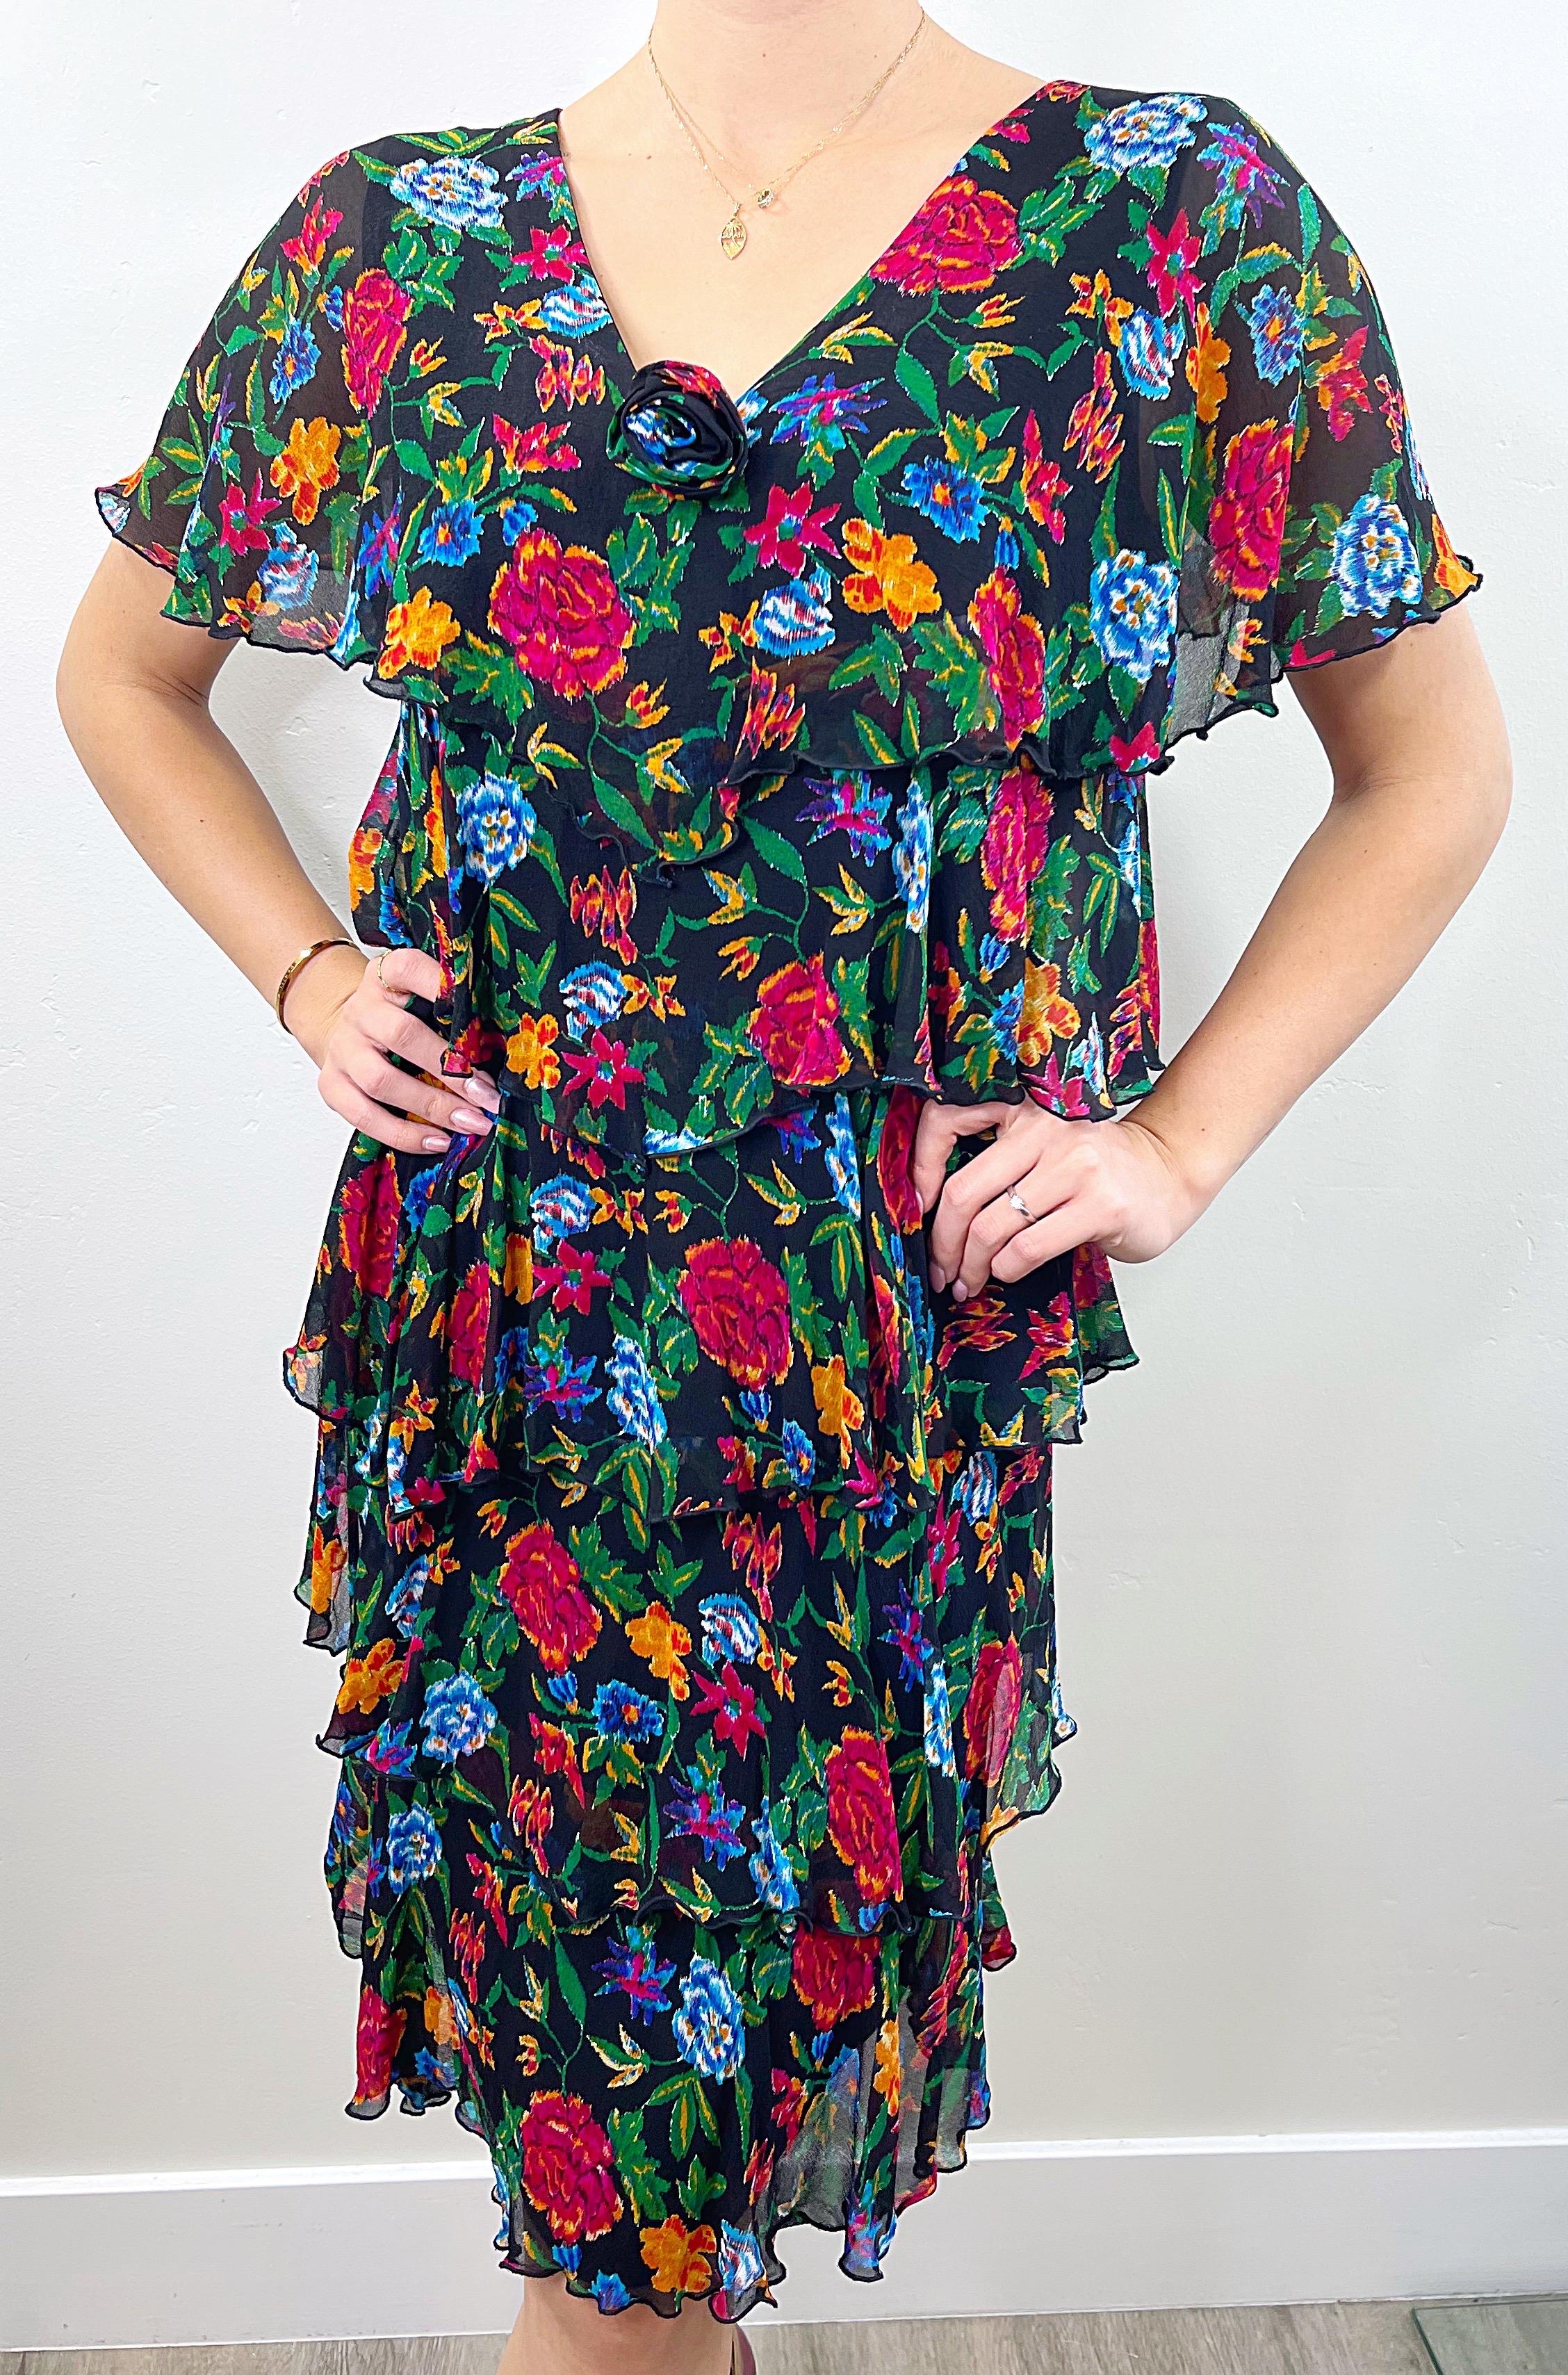 1970s Holly’s Harp Silk Chiffon Colorful Flower Print Tiered Vintage 70s Dress For Sale 4